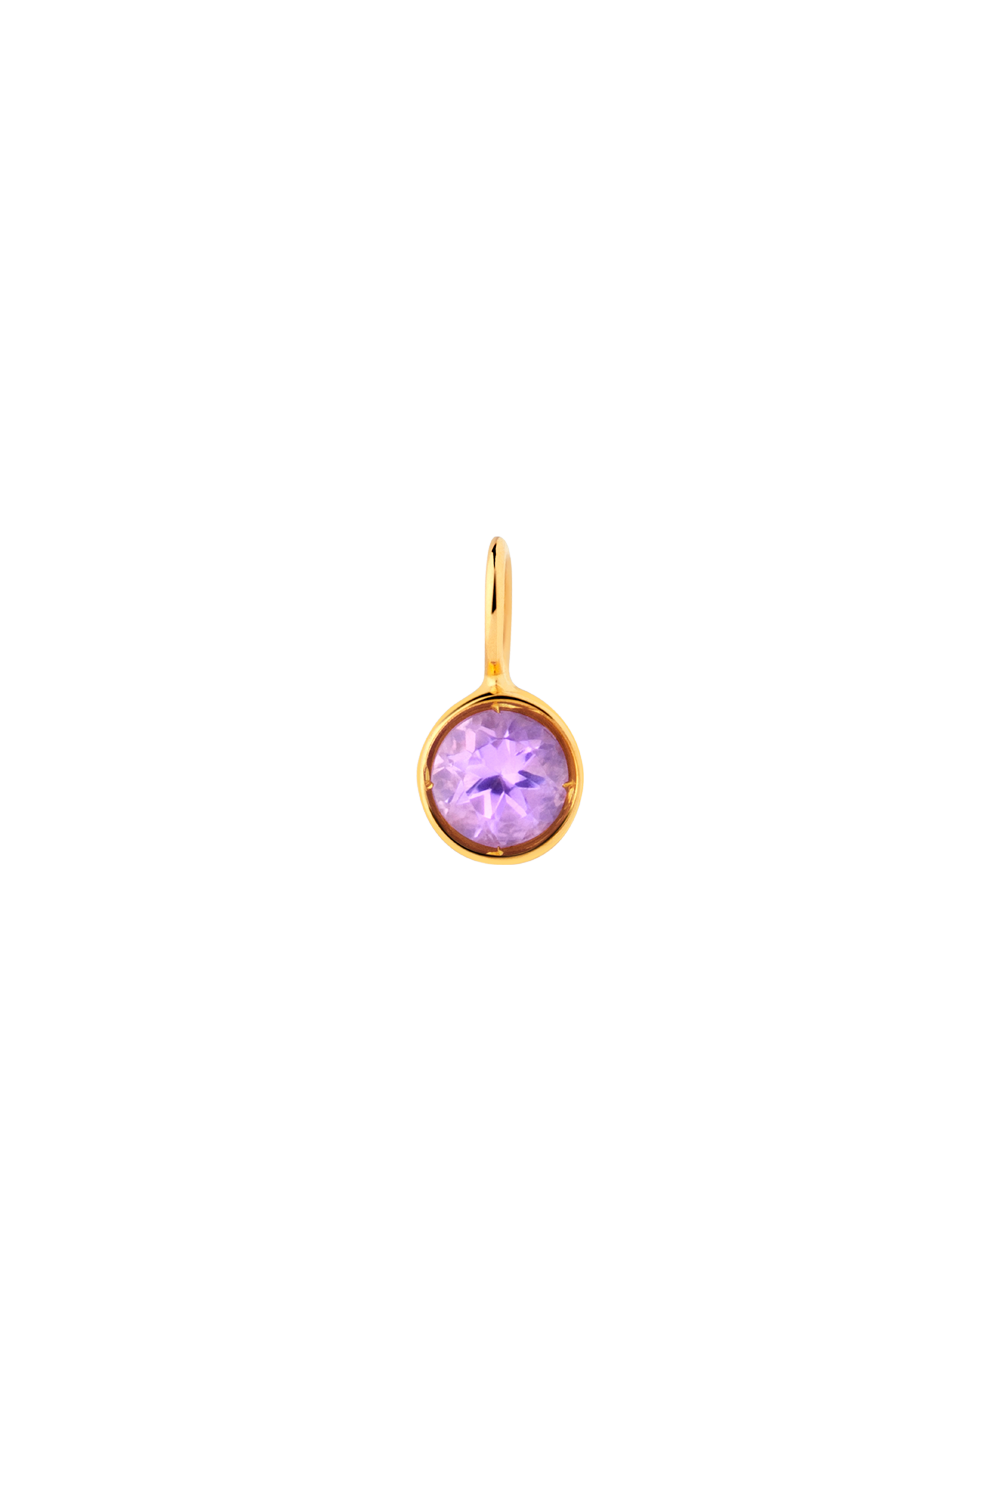 The Fine Gold Smiley Charm